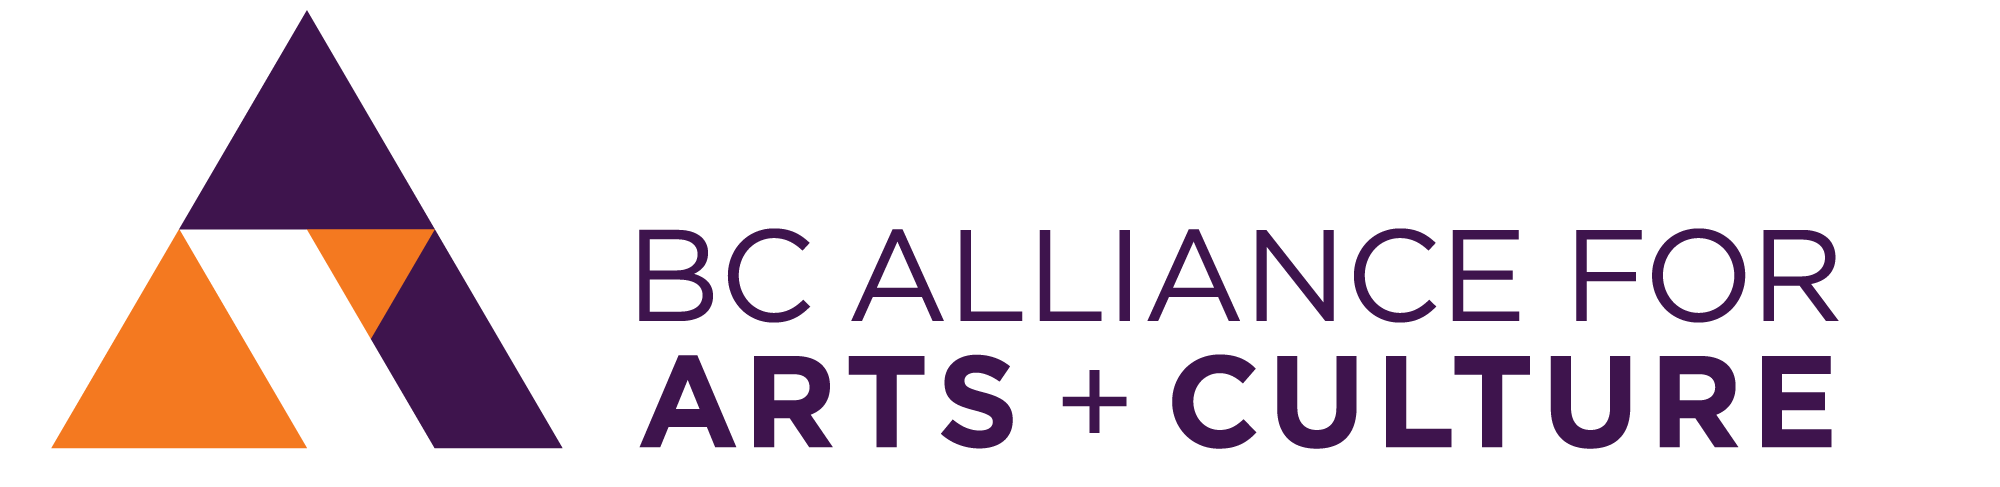 BC-Alliance-For-Arts-Logo-Strip.png